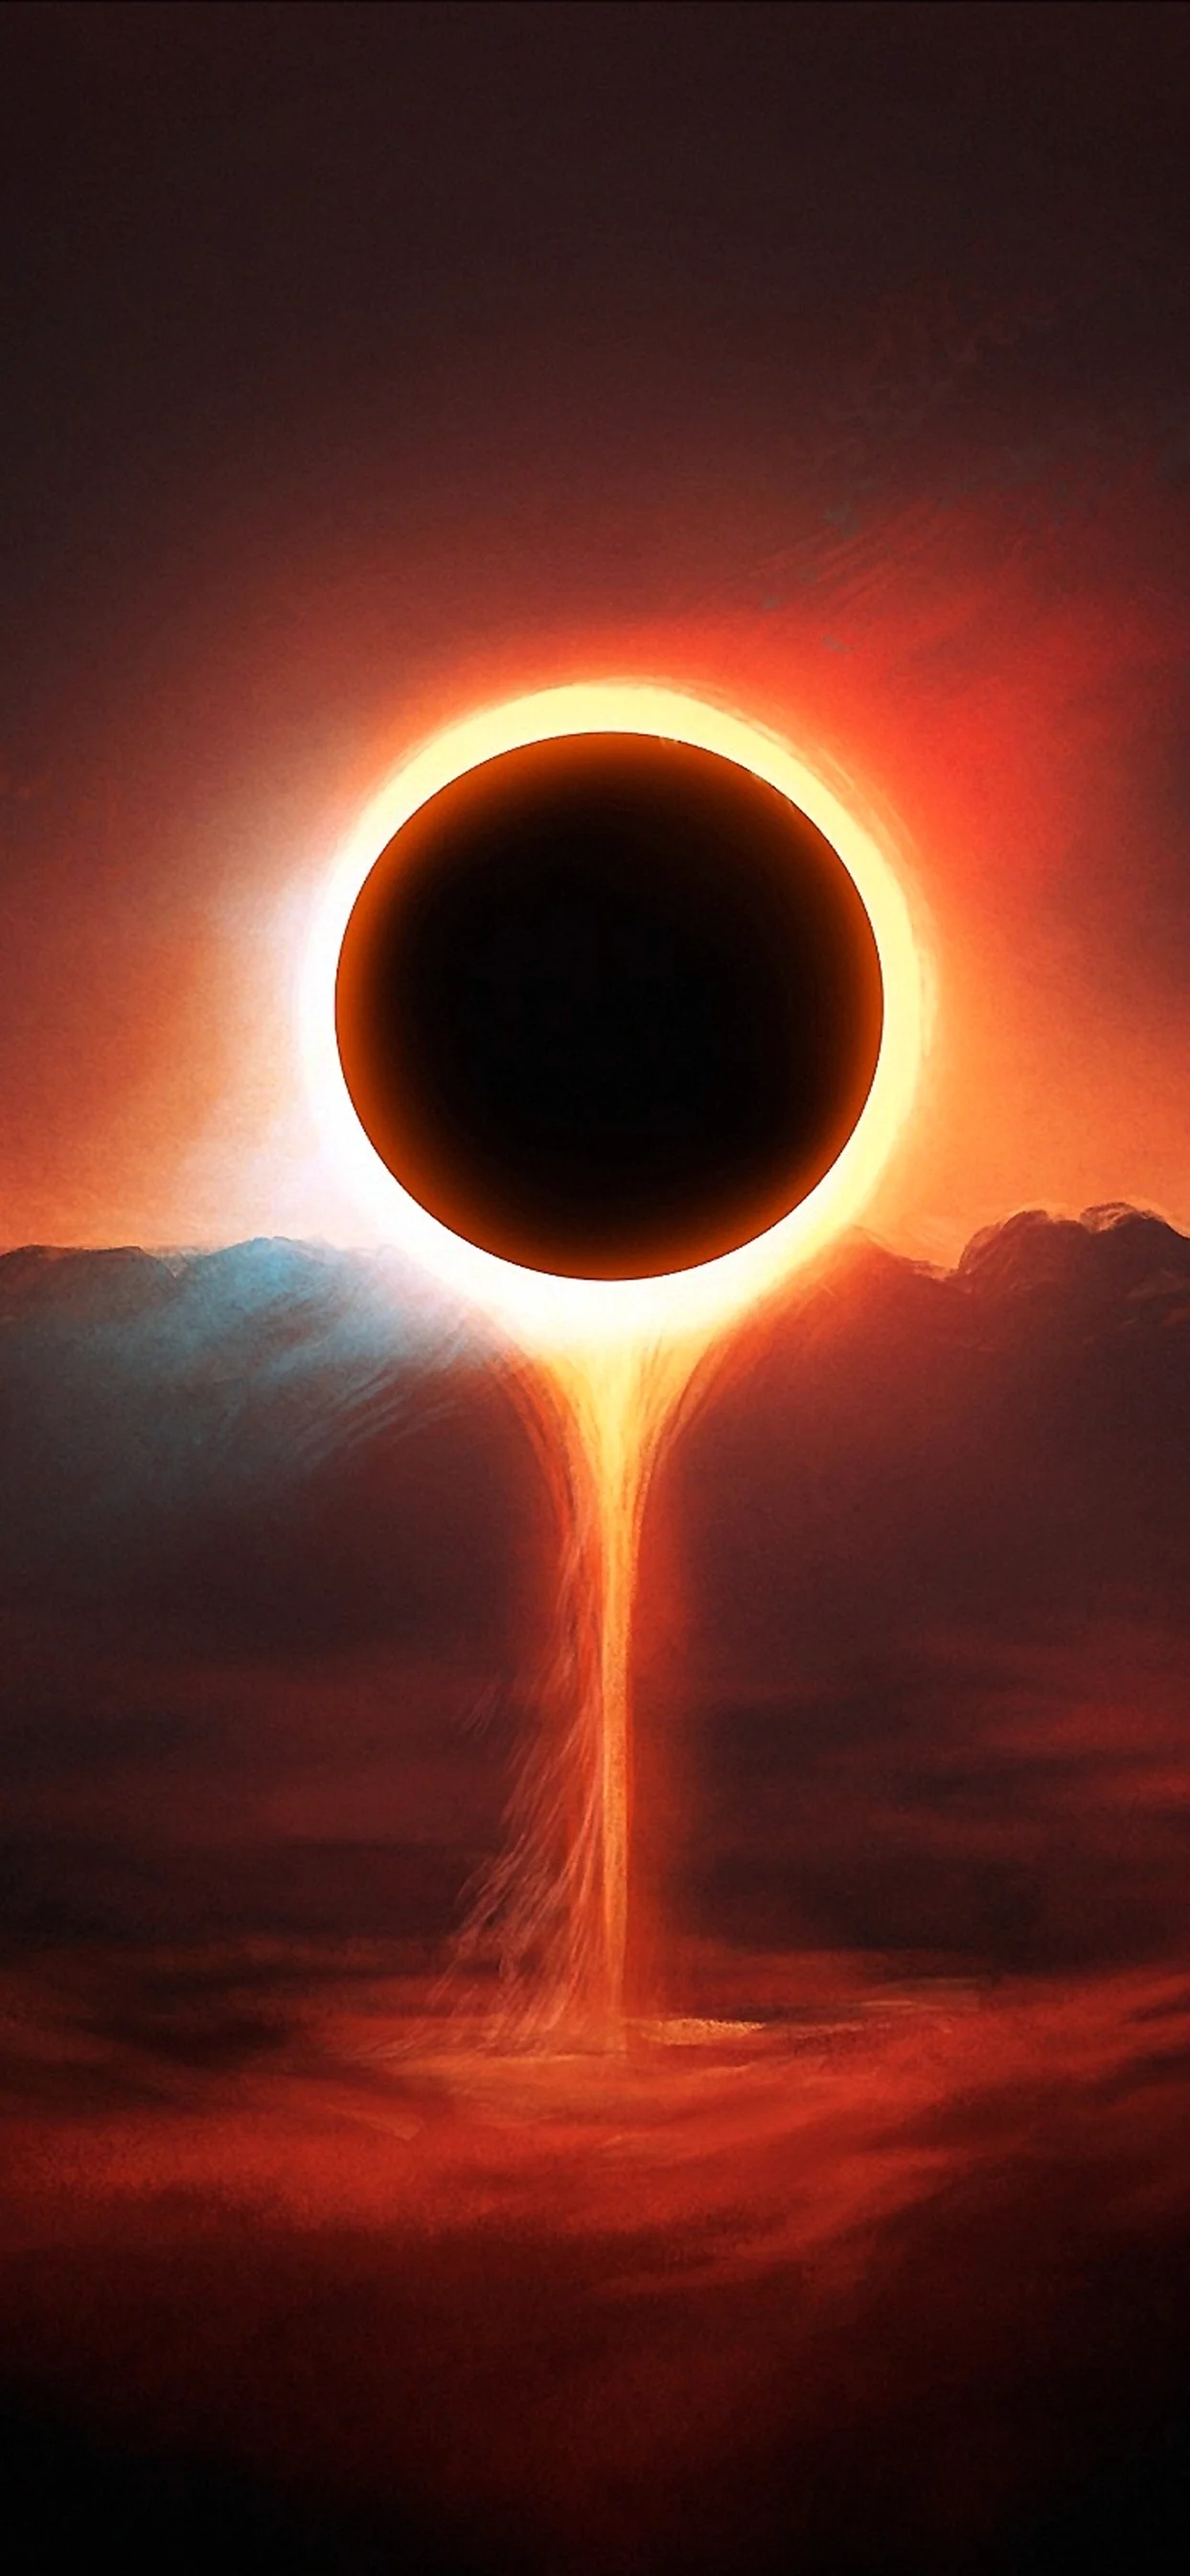 Black Hole Sun Wallpaper for iPhone 11 Pro Max